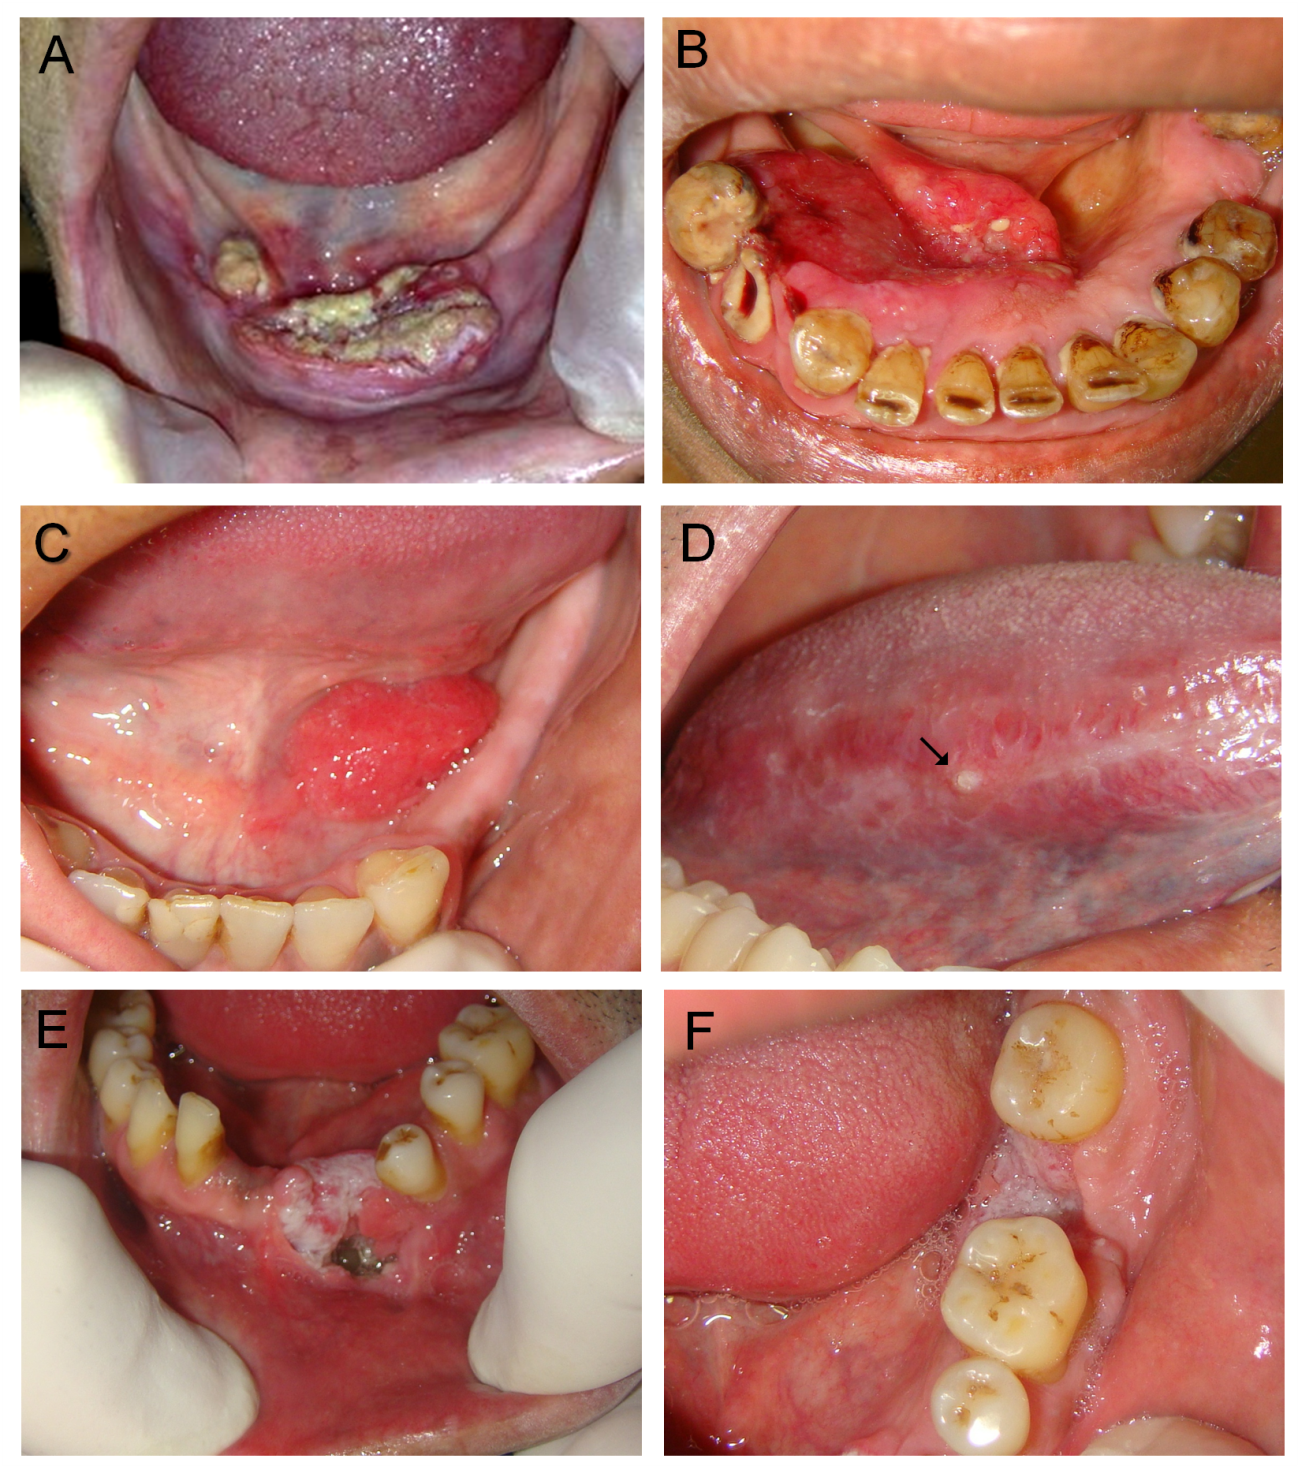 Hpv wart on tongue treatment - Mouth warts on tongue